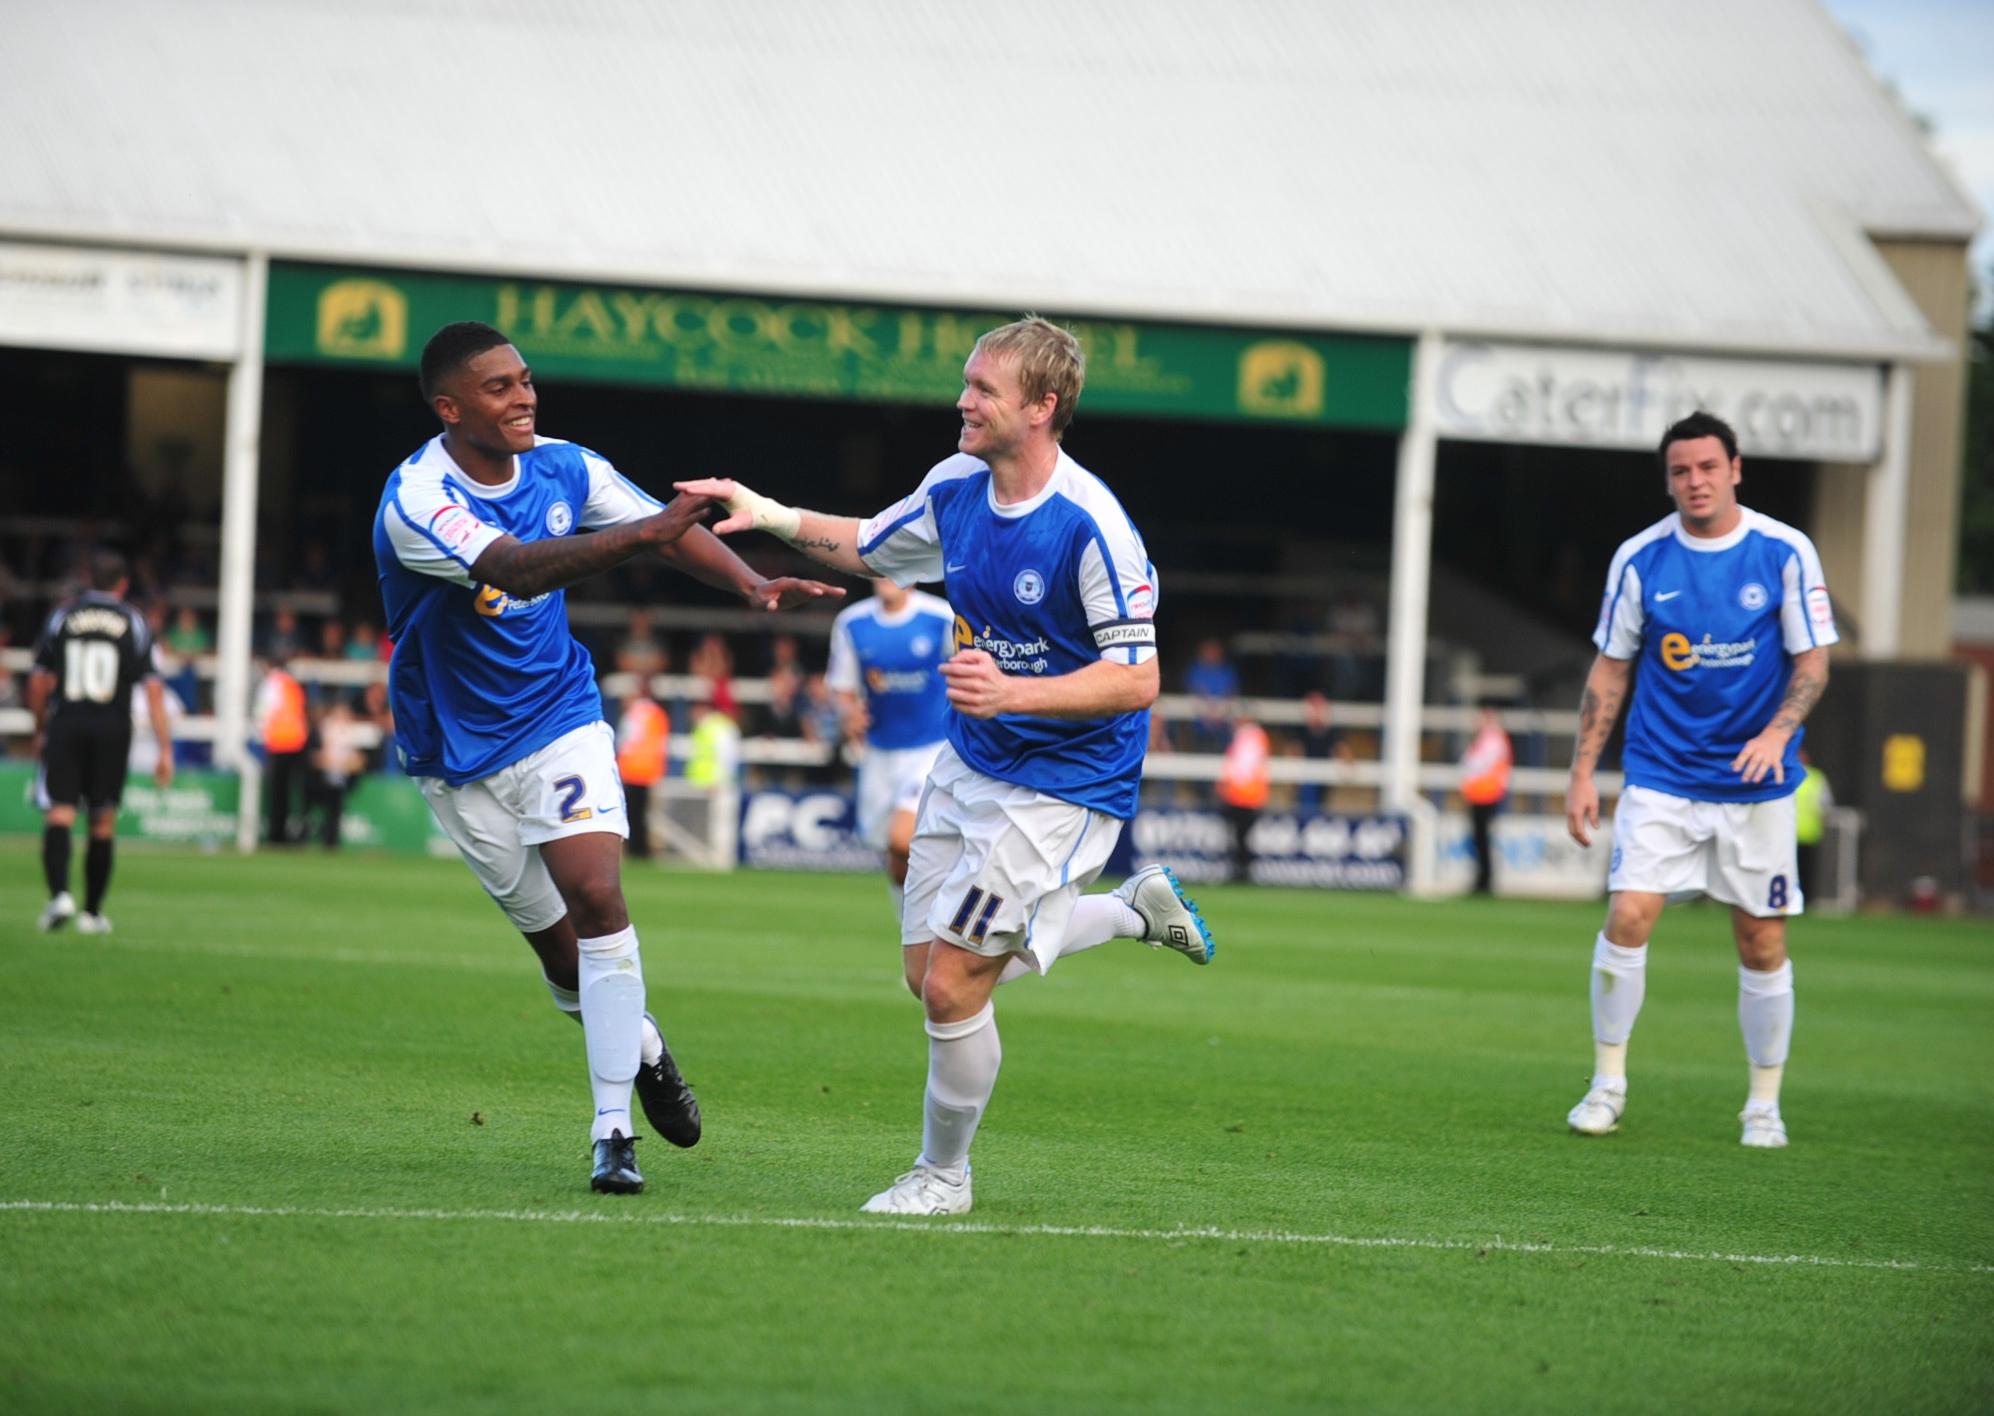 Posh won four matches by six-goal margins v Ipswich (7-1, 2011), Carlisle (6-0, 2011), Reading (6-0, EFL Cup, 2013) and Rochdale (6-0, 2019). Grant McCann is pictured after scoring against Ipswich.